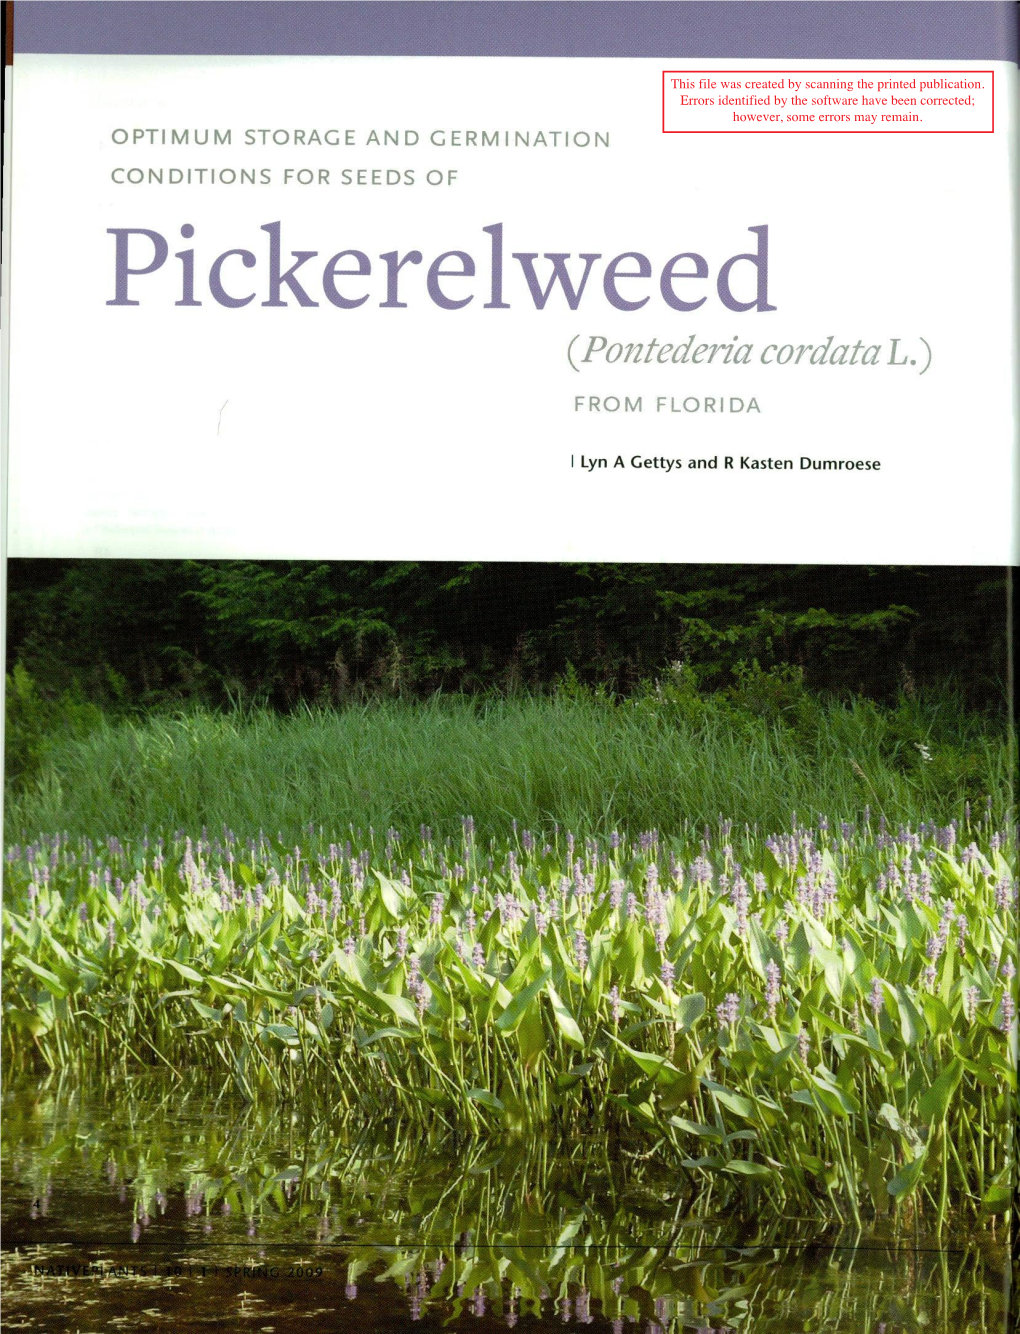 Optimum Storage and Germination Conditions for Seeds of Pickerelweed